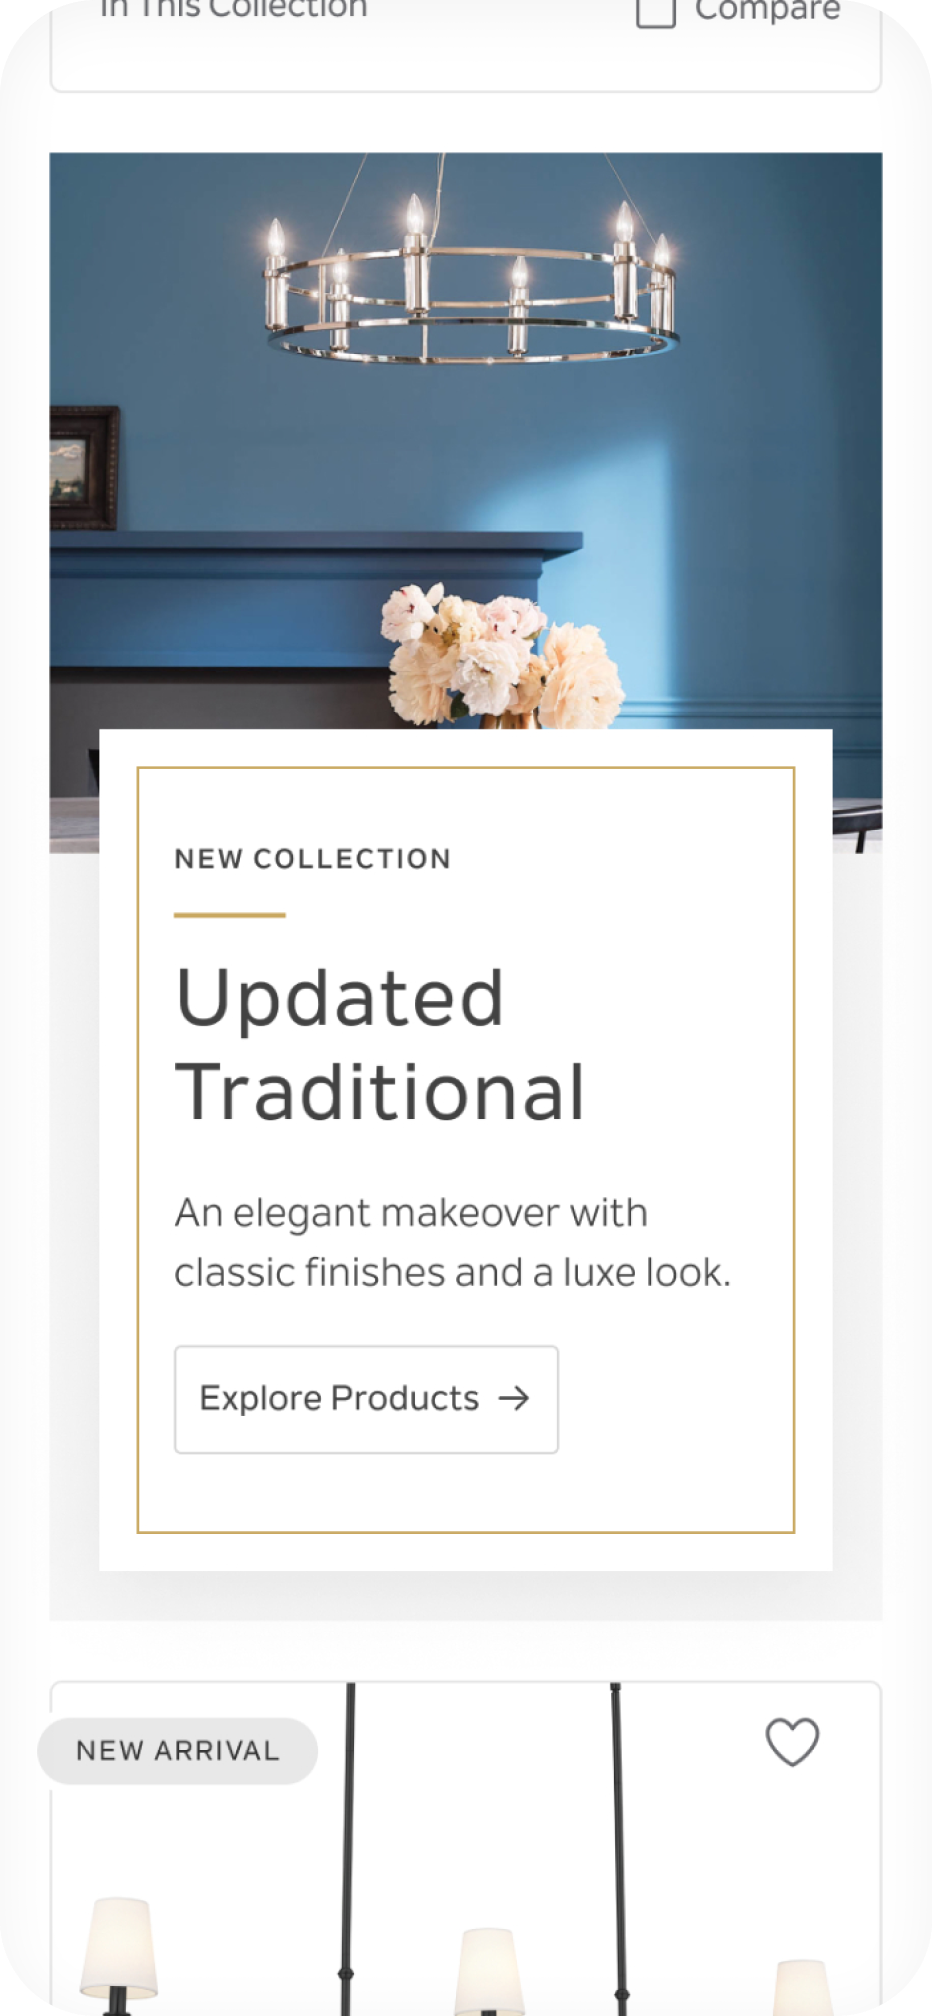 Shelf section featuring a new collection titled "Updated Traditional"